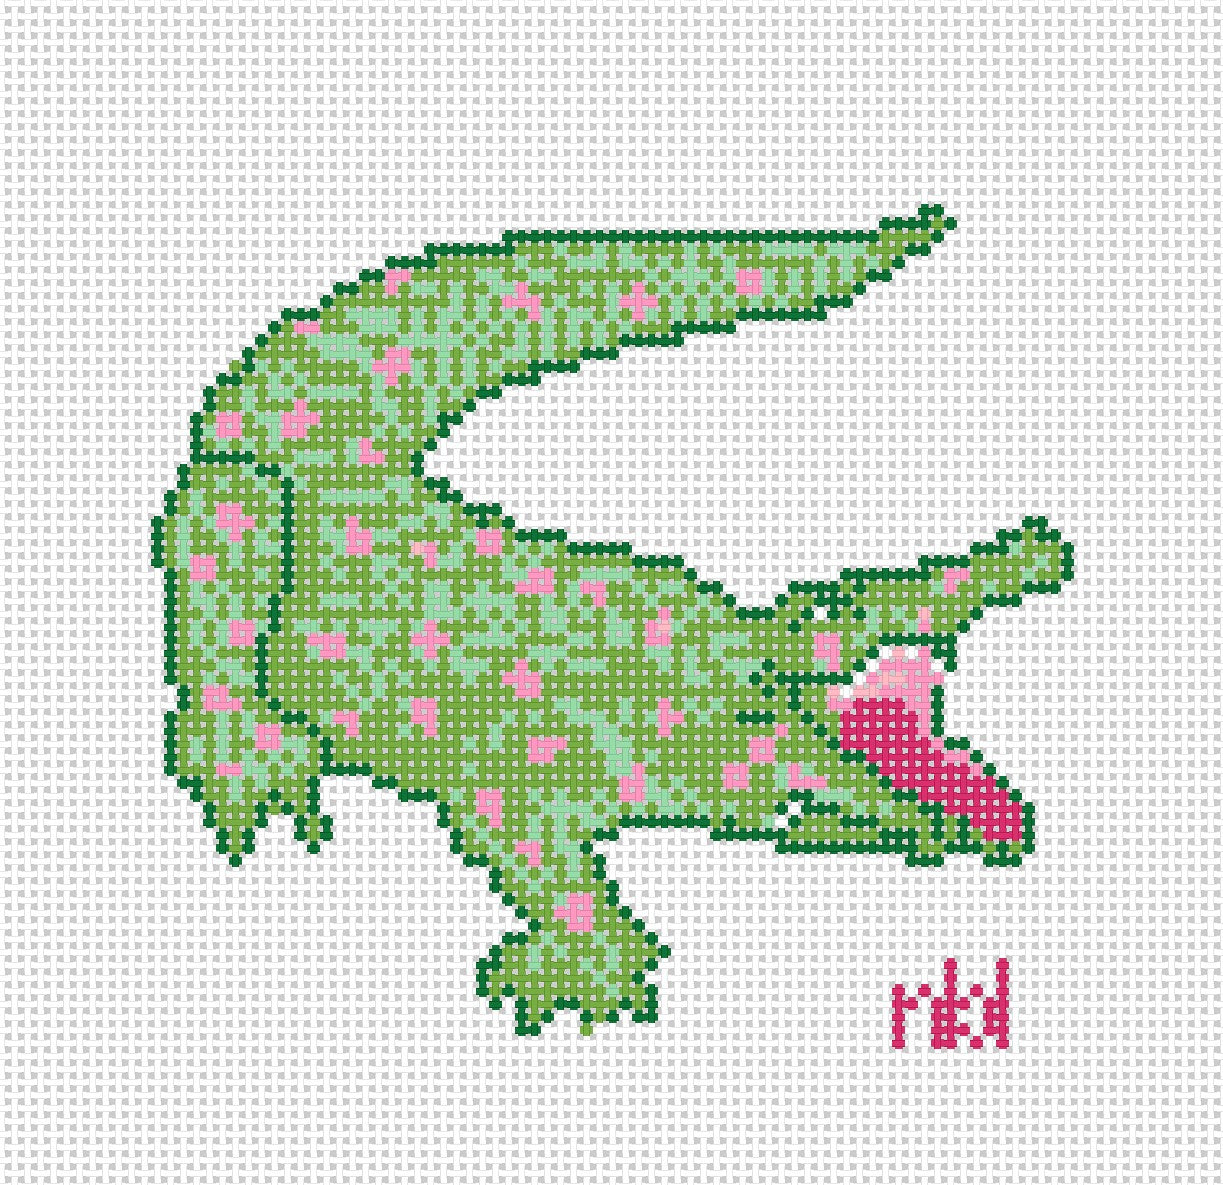 Gator 4 inch - Needlepoint by Laura